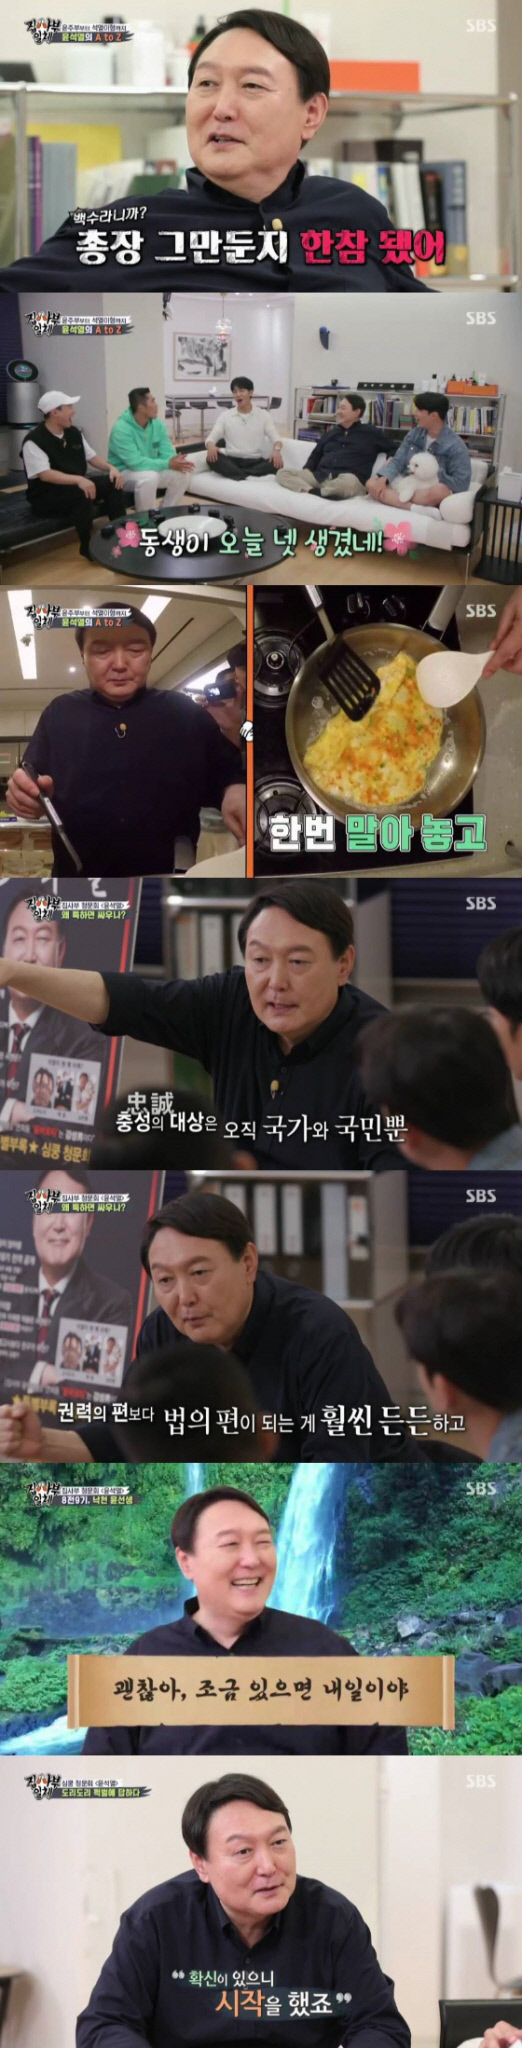 All The Butlers, which former prosecutor general Yoon Seok-ryul appeared as masters, surpassed the double digits of top TV viewer ratings per minute.According to Nielsen Korea, a TV viewer rating research company on the 20th, SBS entertainment program All The Butlers, which was broadcast on the 19th, recorded 7.8%, up 3.9% from last week.Top-line and competitive indicators, 2049 target TV viewer ratings, hit 2.2%, while top-rated TV viewer ratings per minute soared to 12.1%.This All The Butlers was featured as a presidential candidate.The news that three of the most supportive presidential candidates who declared their candidacy for the 20th presidential election was known to appear, and the first runner on the day, former prosecutor general Yoon Seok-ryul appeared.On this day, Yoon Seok-ryul welcomed the members with comfortable clothes at his house, and his house was revealed for the first time.Yoon Seok-ryul said, I asked you to come to do something delicious. Kimchi stew, bulgogi, egg rolls, etc. are treated with skill, and members who are hard to call.I am a white man now.It has been a long time since I quit Prosector General of South Korea. Or Actor Ju Hyuns vocalization was also friendly and friendly.When asked about the resignation of Prosector General of South Korea and the presidential candidacy, Yoon Seok-ryul said, It is difficult to decide to run.Its not normal, he said, adding that he decided to run for president after a long period of troubles after his retirement.Our generation could have acquired Apartment for about 10 years, but it has become too difficult to get a house for the present, said Yoon Seok-ryul. If a young person does not have hope, the society is dead.Im a little afraid when I do something new, he said. Im a little scared.Im sure I can push it in the direction I thought I would, without giving up, he said.The All The Butlers hearing was held to intensively explore Master Yoon Seok-ryul.First, Yoon Seok-ryul talked about his representative quote, Im not loyal to people. He told his juniors, The prosecutor should not be loyal to people.People are people, I said, people are people and people. The only objects of loyalty are the nation and the people. They can like people, but they are not loyal.Yoon Seok-ryul said, The chicken is important, but it is with the president. The members said, We handled the case that we took over according to the law.There is no reason to challenge the president, he said. It is much more secure to be on the side of the law than to the side of power.If the law of the powerful is not properly handled, the people can not be told to keep the law, and society is in turmoil. It is important how much the investigation into the powerful is based on principle.We must follow the principle unconditionally, he said.In addition, the hearing focused attention on keywords related to them such as Left, 9th in 8, and Doridori.When asked if there was anything he wanted to take away from Lee Jae-myung and Lee Nak-yeon, who foreshadowed the presidential feature, Yoon Seok-ryul said, I want to be meticulous to Lee Nak-yeon and I want to resemble Lee Jae-myung.Yoon Seok-ryul replied, Yes, to the question I am the 20th president of the Republic of Korea.Im going to have to show you more, but since youve seen me doing my job so far, youll have the belief that Ill do my job well.Finally, Yoon Seok-ryul asked, If I become president, I will not do this. Sharing rice together is the basis of communication.I will always communicate with many people, including opposition parties, journalists, and people who need encouragement, he said, adding, I will not eat and eat, and I will not hide in front of the people whether I did well or wrong.Meanwhile, the special feature of All The Butlers presidential candidate will be Lee Jae-myung Gyeonggi Province Governor on the 26th following former prosecutor general Yoon Seok-ryul, and Lee Nak-yeon, former Democratic Party leader on October 3rd.